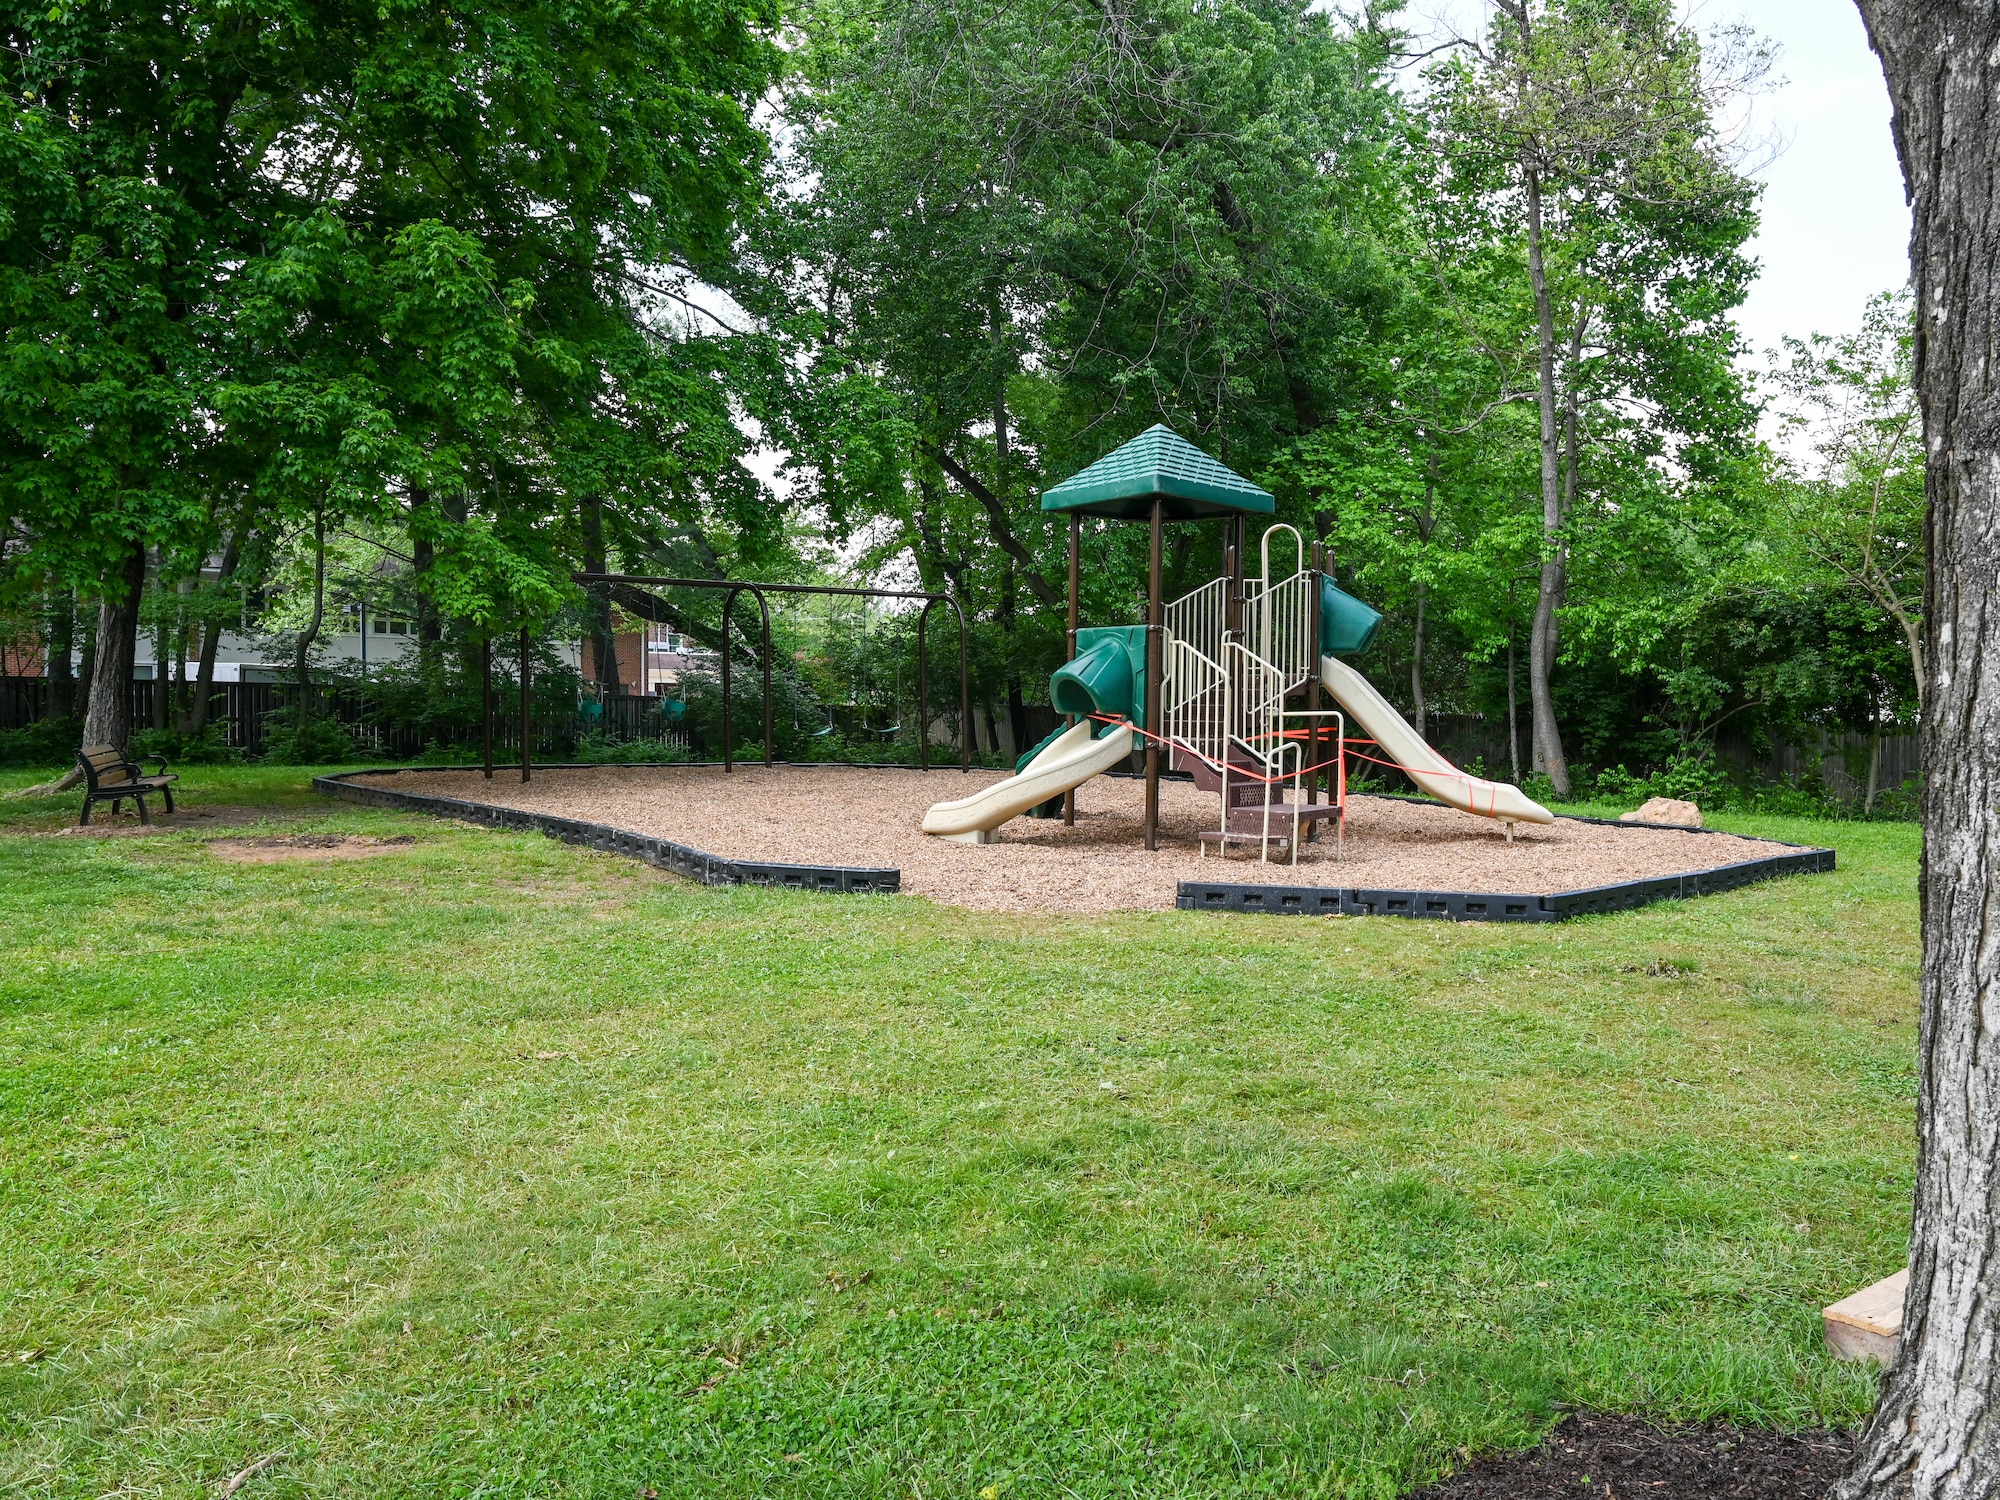 The recently completed Master Sgt. Scott Walters Memorial Playground is in Vienna, Virginia, April 29th, 2023. Walters, a well-loved member of the unit and community organizer, asked for the playground to be constructed as one of his final wishes. (U.S. Air Force photo by Tech. Sgt. Andrew Enriquez)